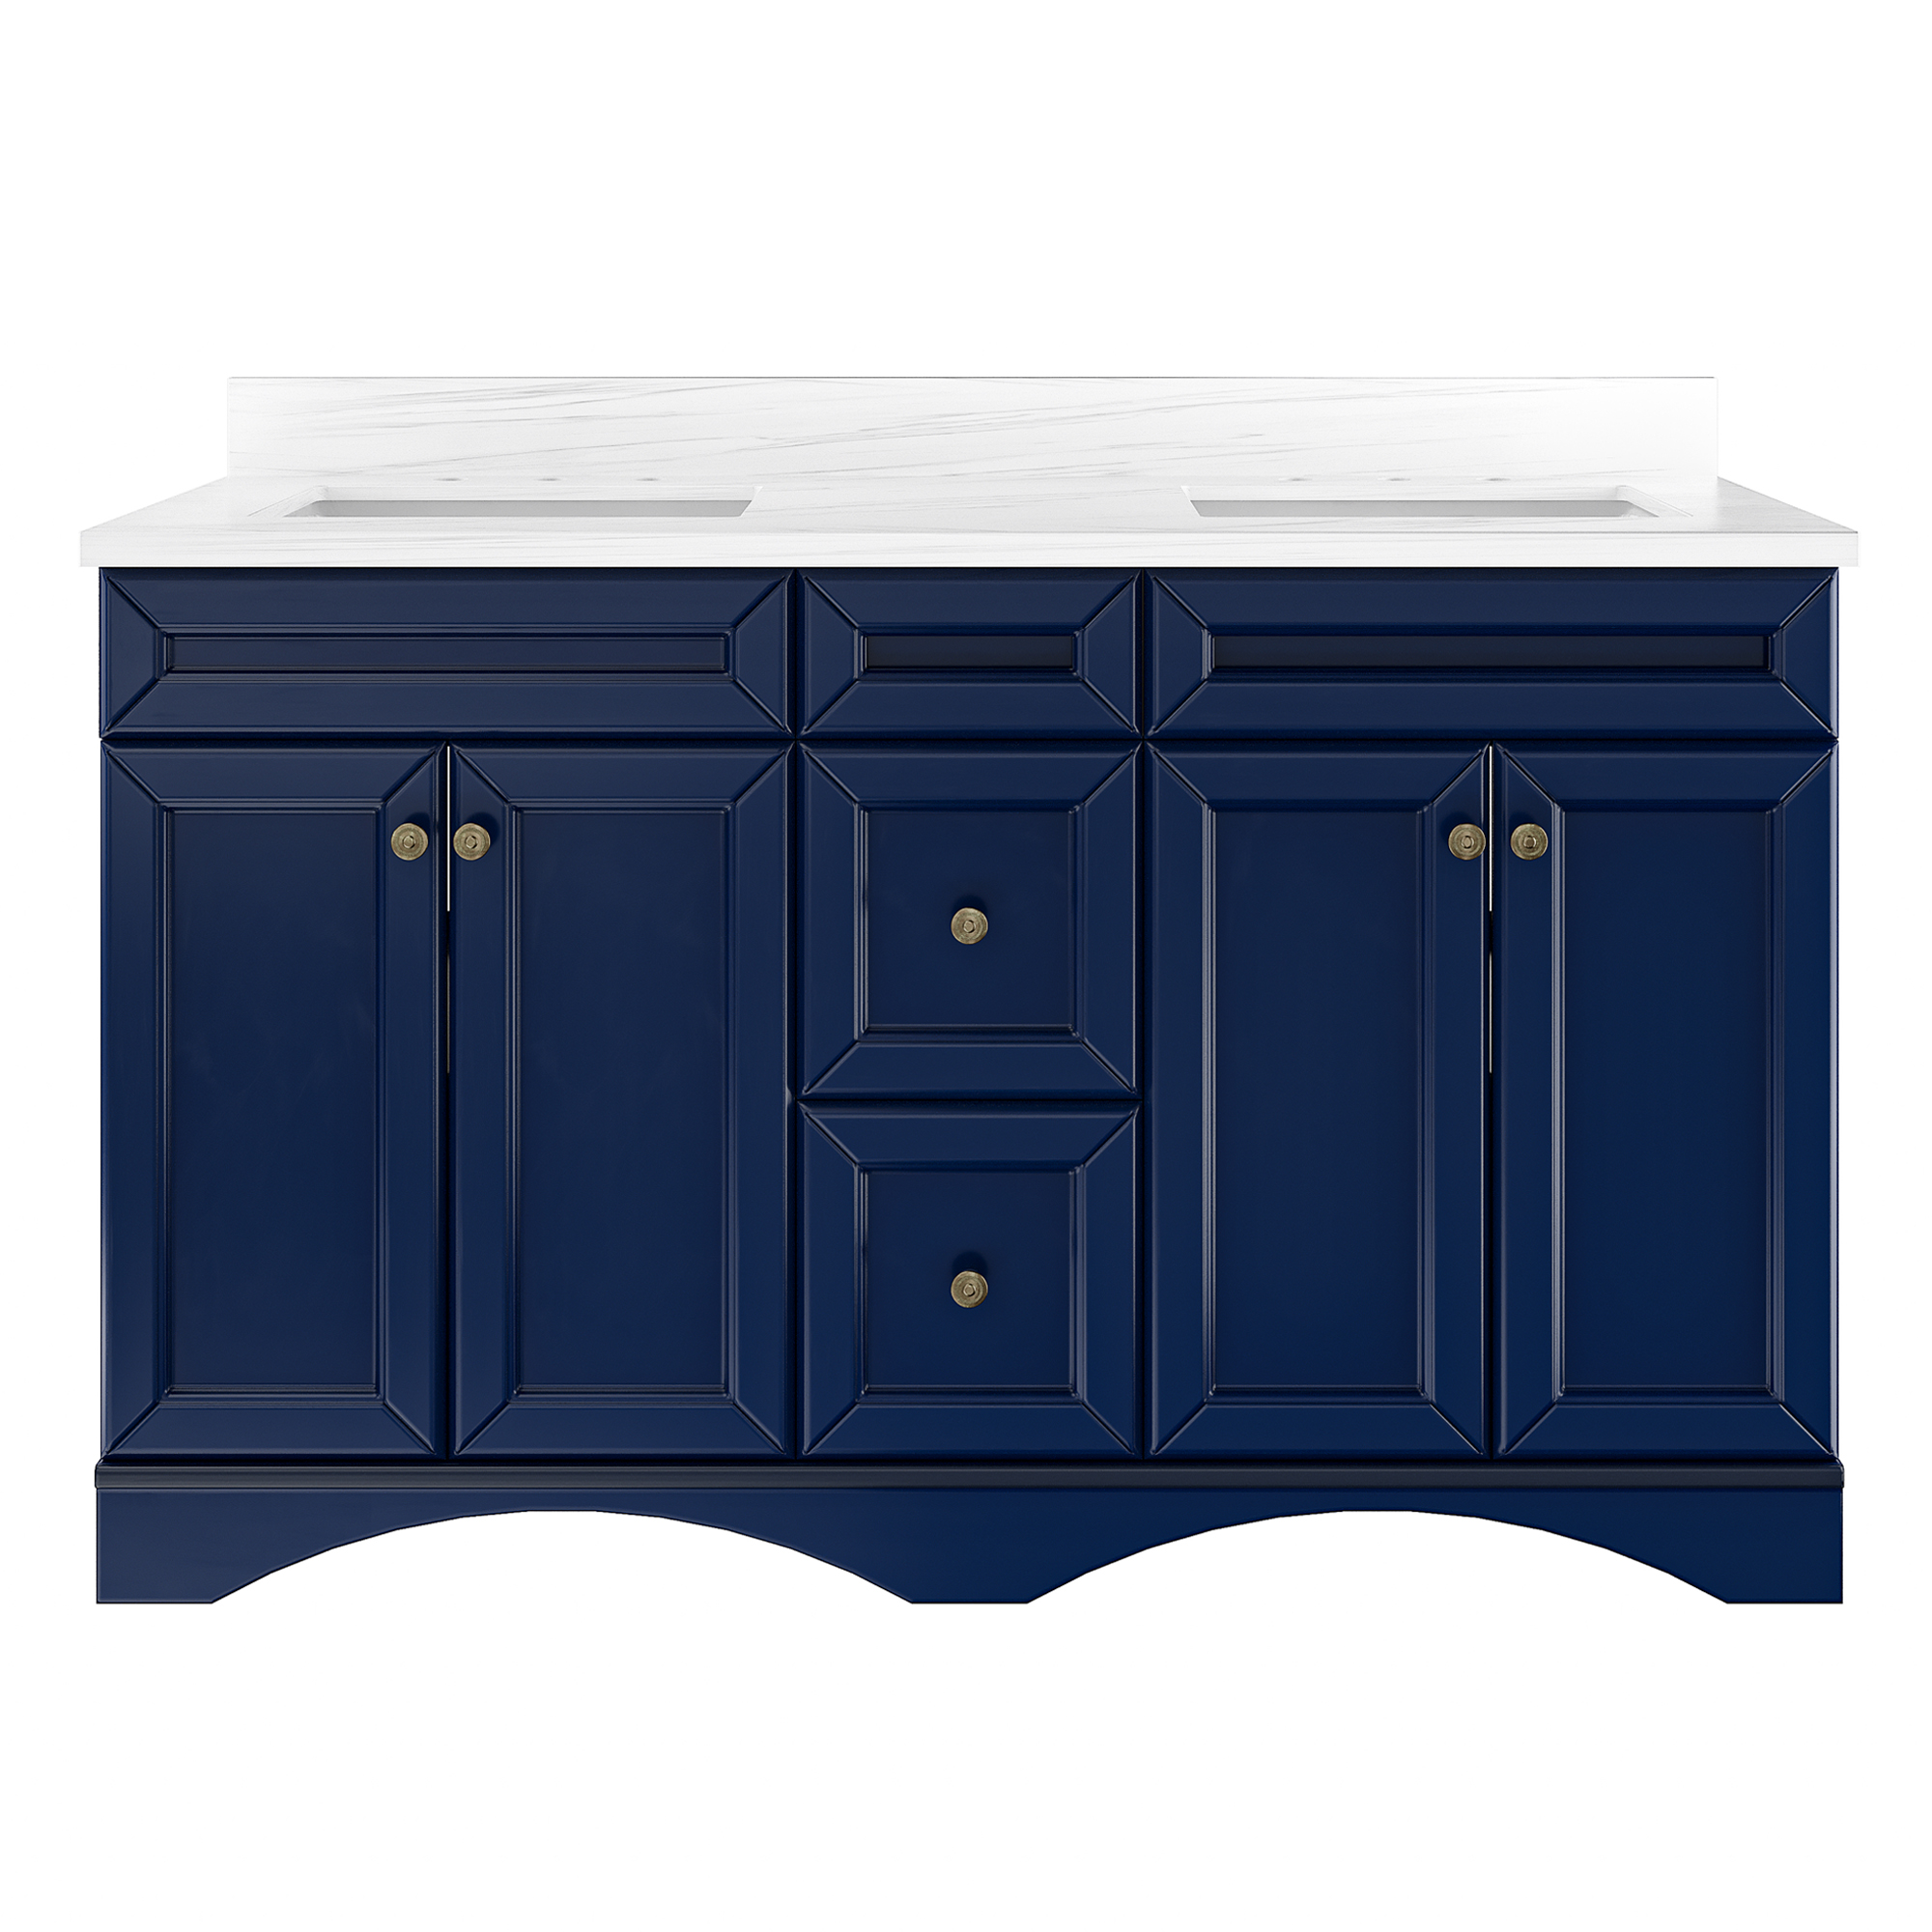 CASAINC Bathroom Vanity 60 x 22 x 35.4 in. with 1.2" Thickness Carrara  White Marble Countertop & backsplash, 2 Center Rectangular Sinks, Soft Closing Doors,  Dove Tail Drawers Construction, Soft Close Drawer Hinges, Navy Blue(No/With Mirror)